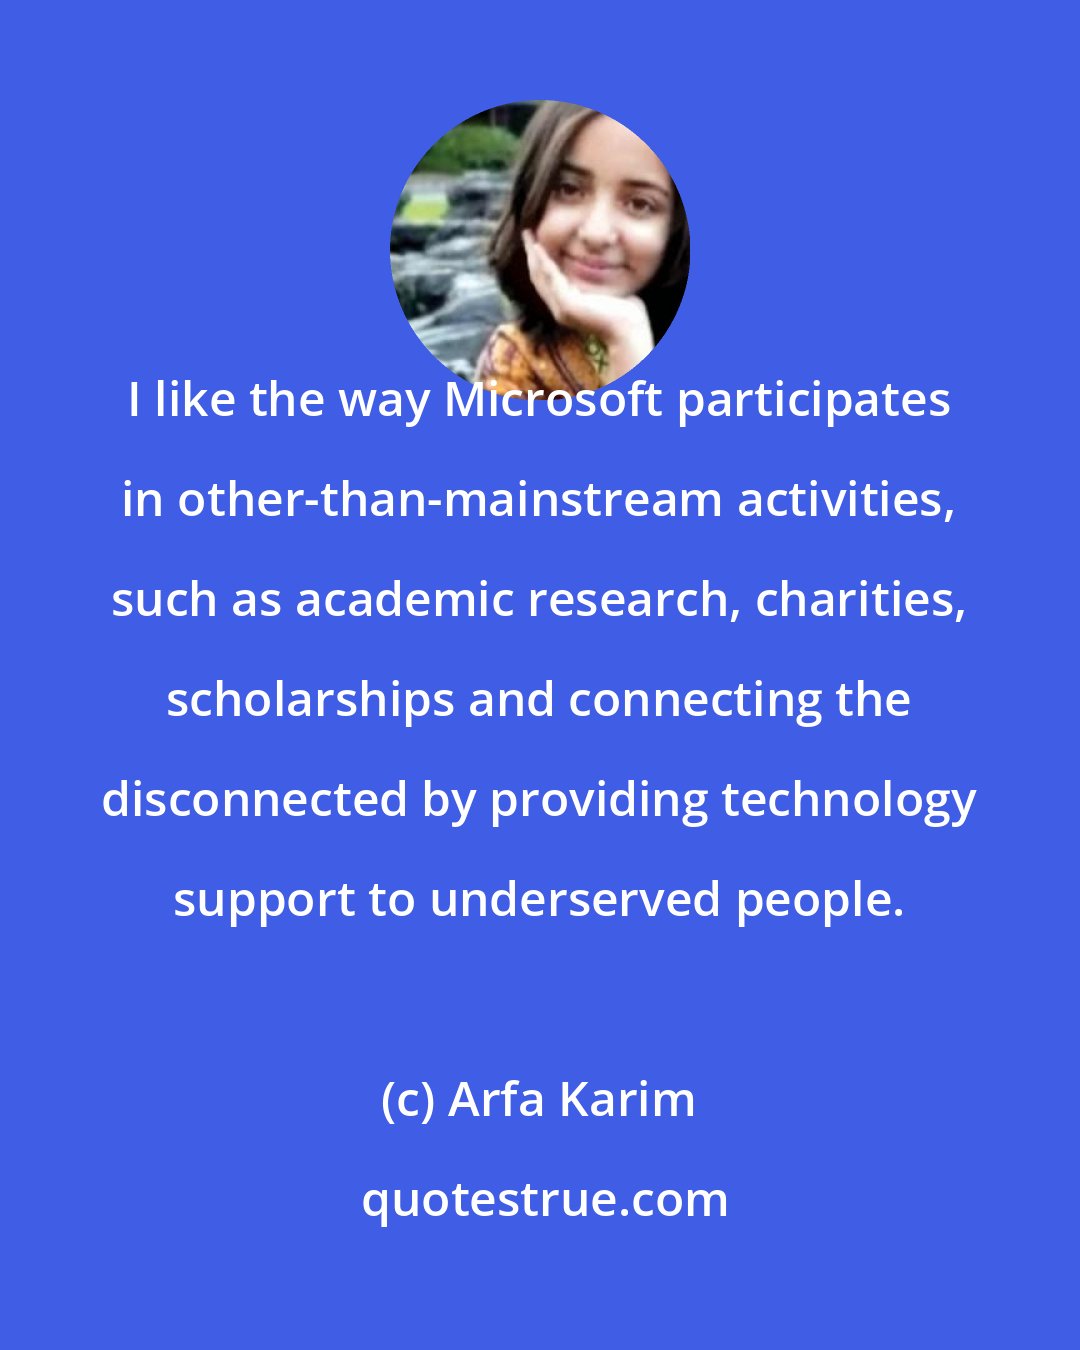 Arfa Karim: I like the way Microsoft participates in other-than-mainstream activities, such as academic research, charities, scholarships and connecting the disconnected by providing technology support to underserved people.